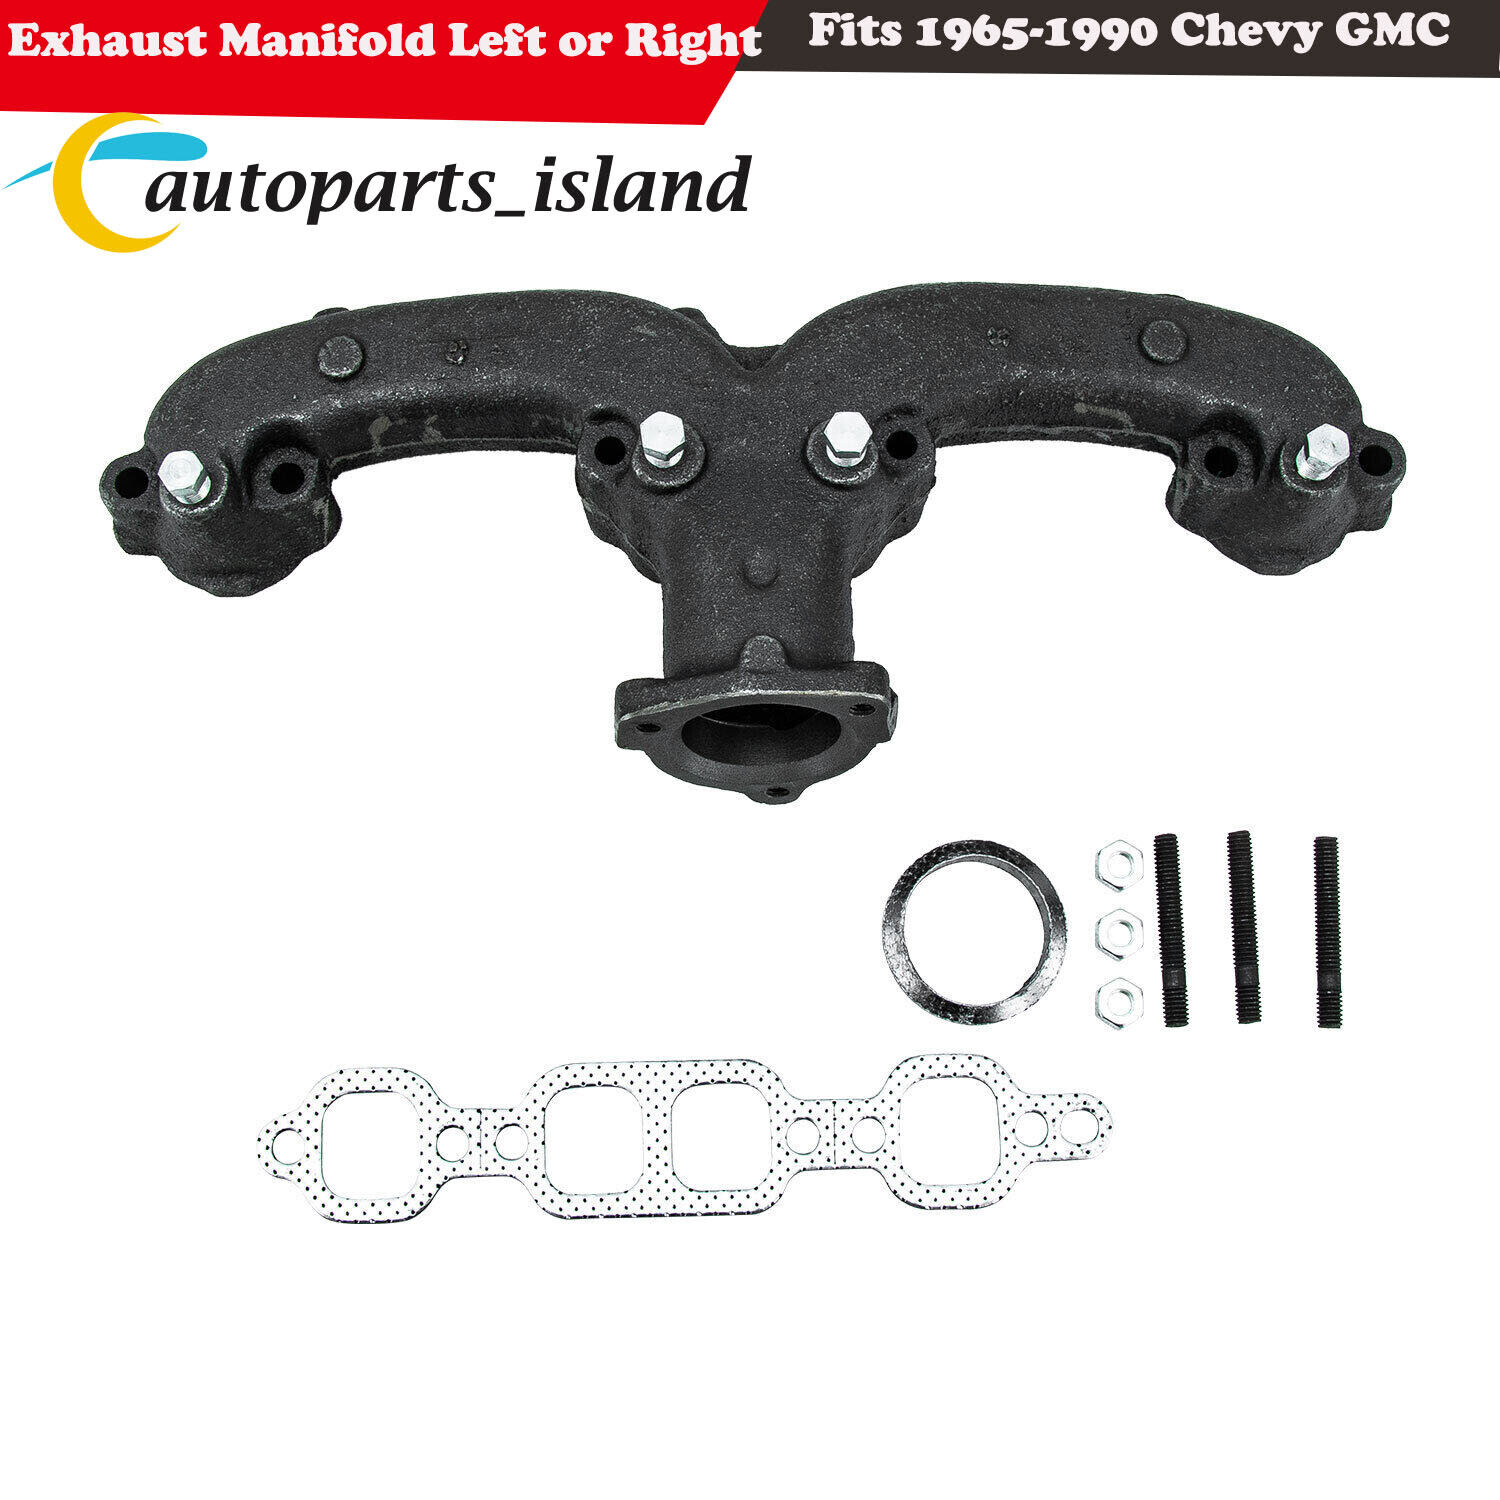 Exhaust Manifold Left or Right Fits 1965-1990 Chevy GMC Van Pickup Small BB